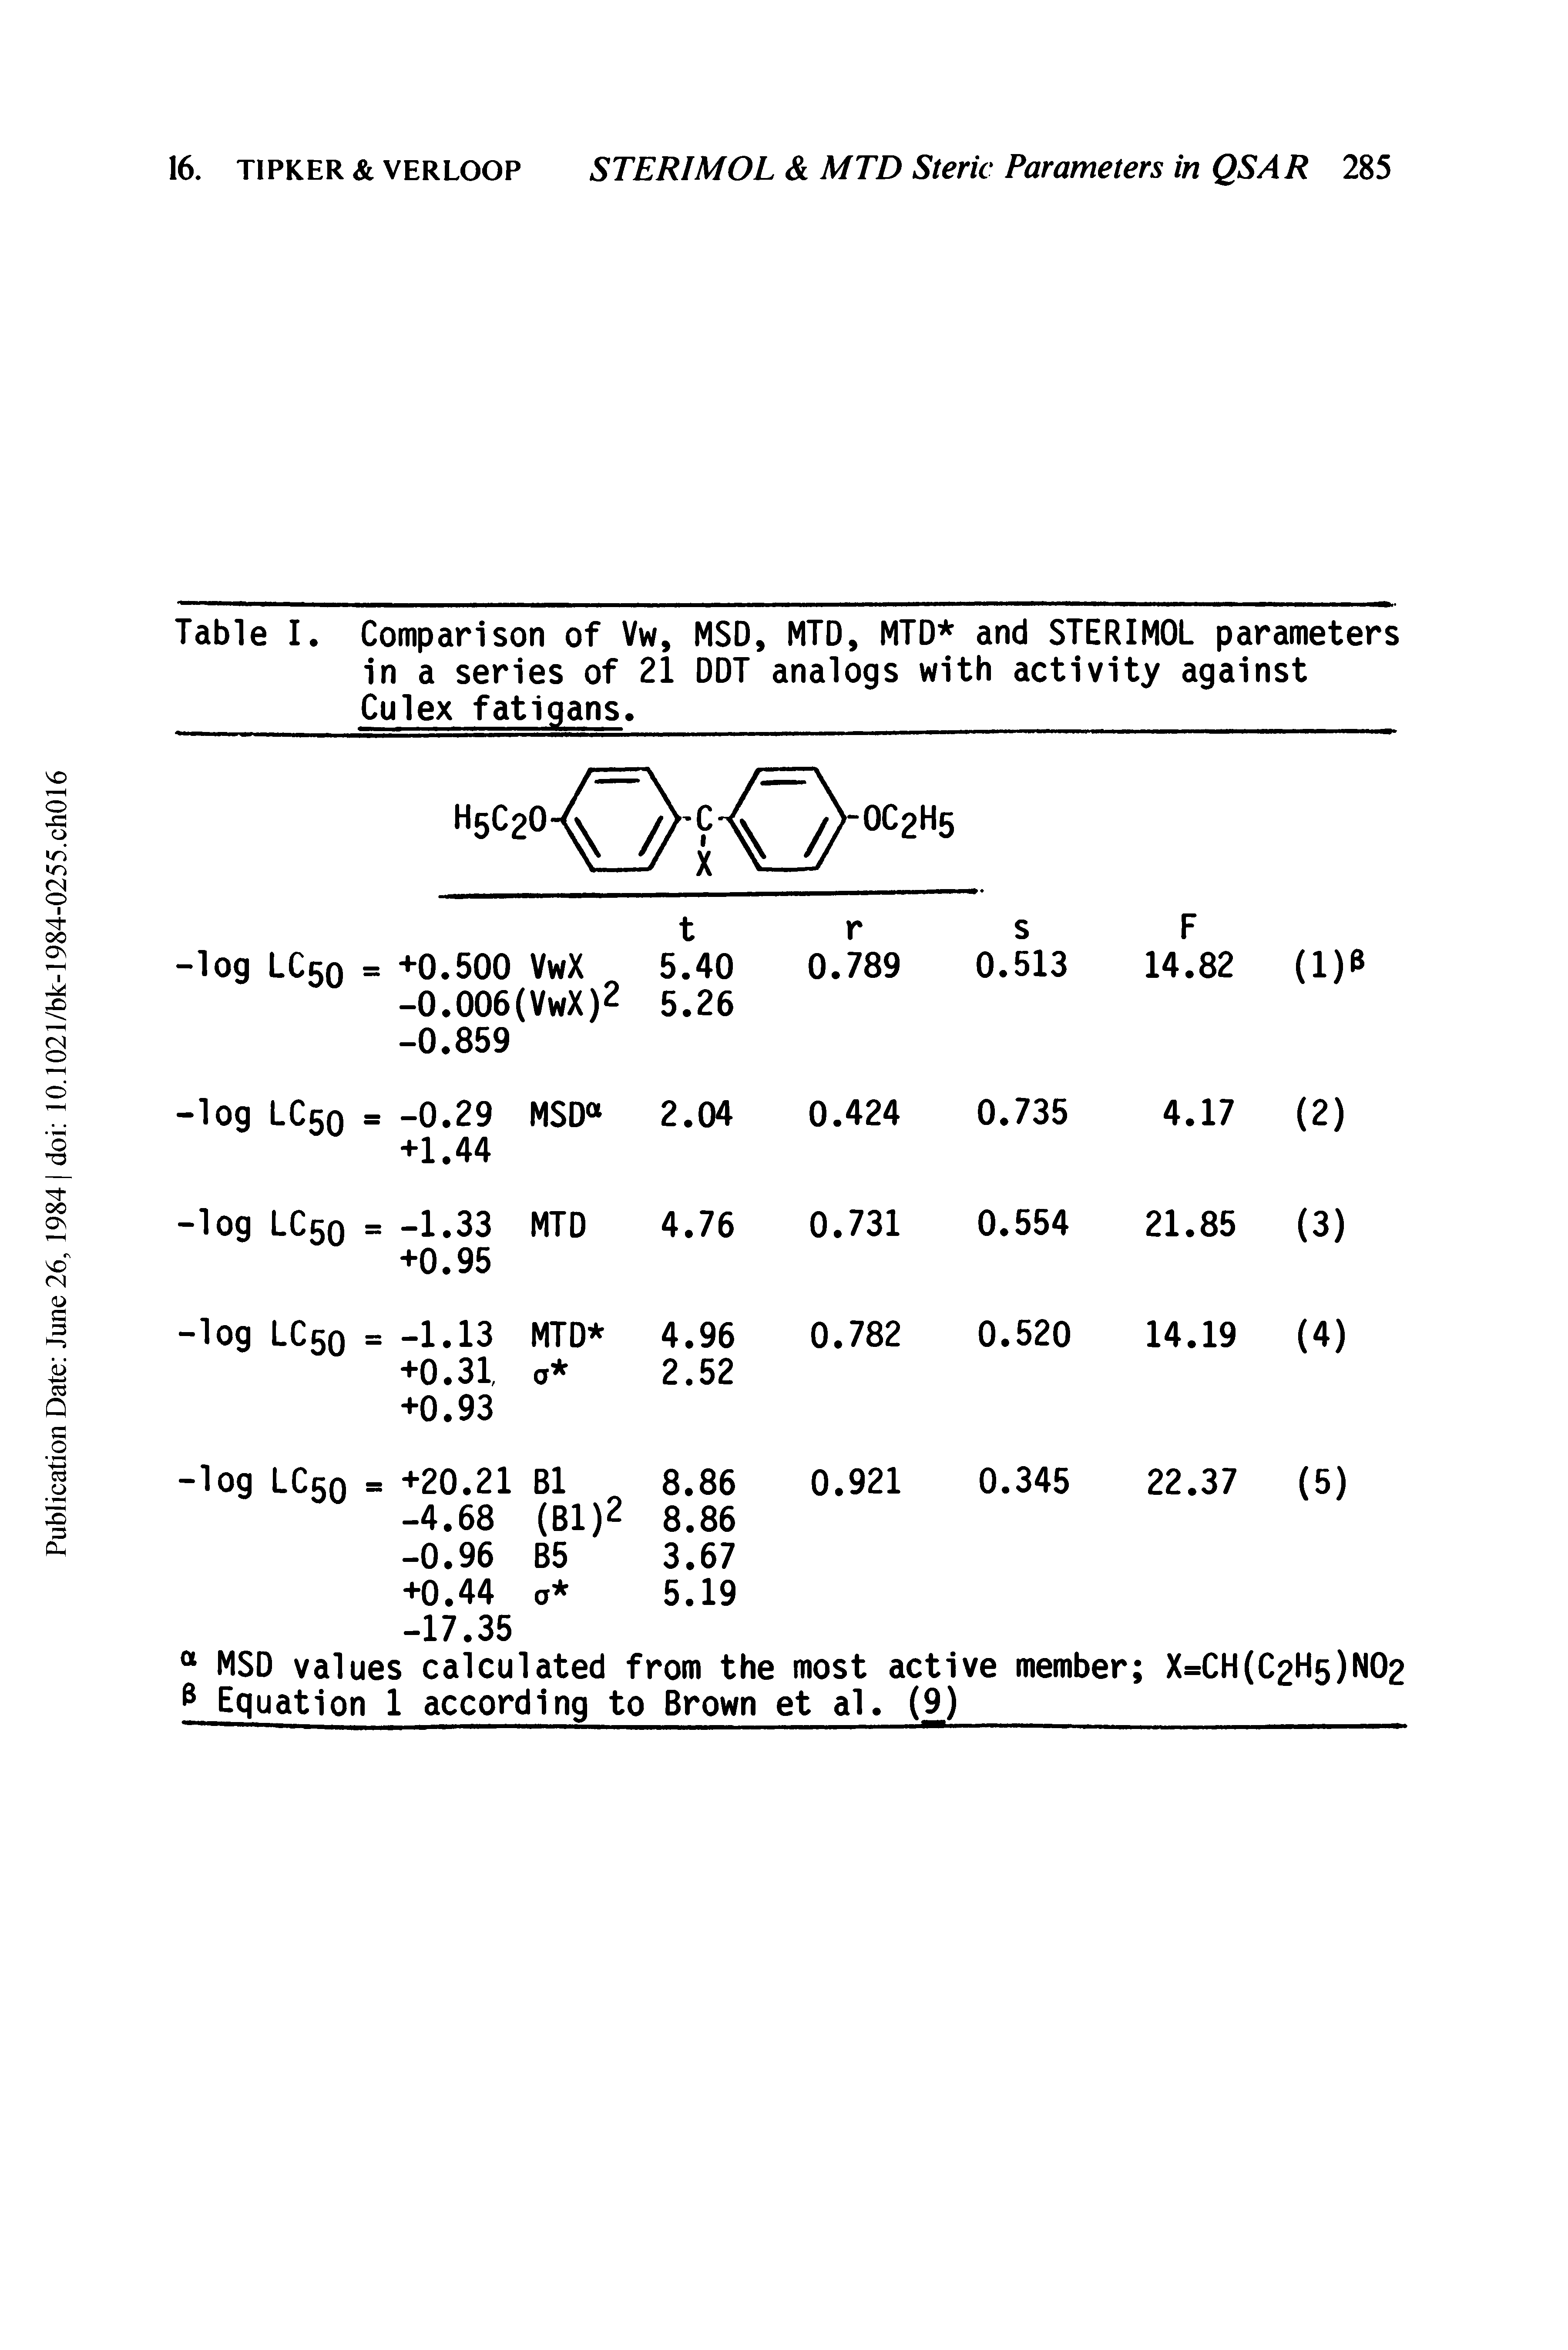 Table I. Comparison of Vw, MSD, MTD, MTD and STERIMOL parameters in a series of 21 DDT analogs with activity against Culex fatigans. ...